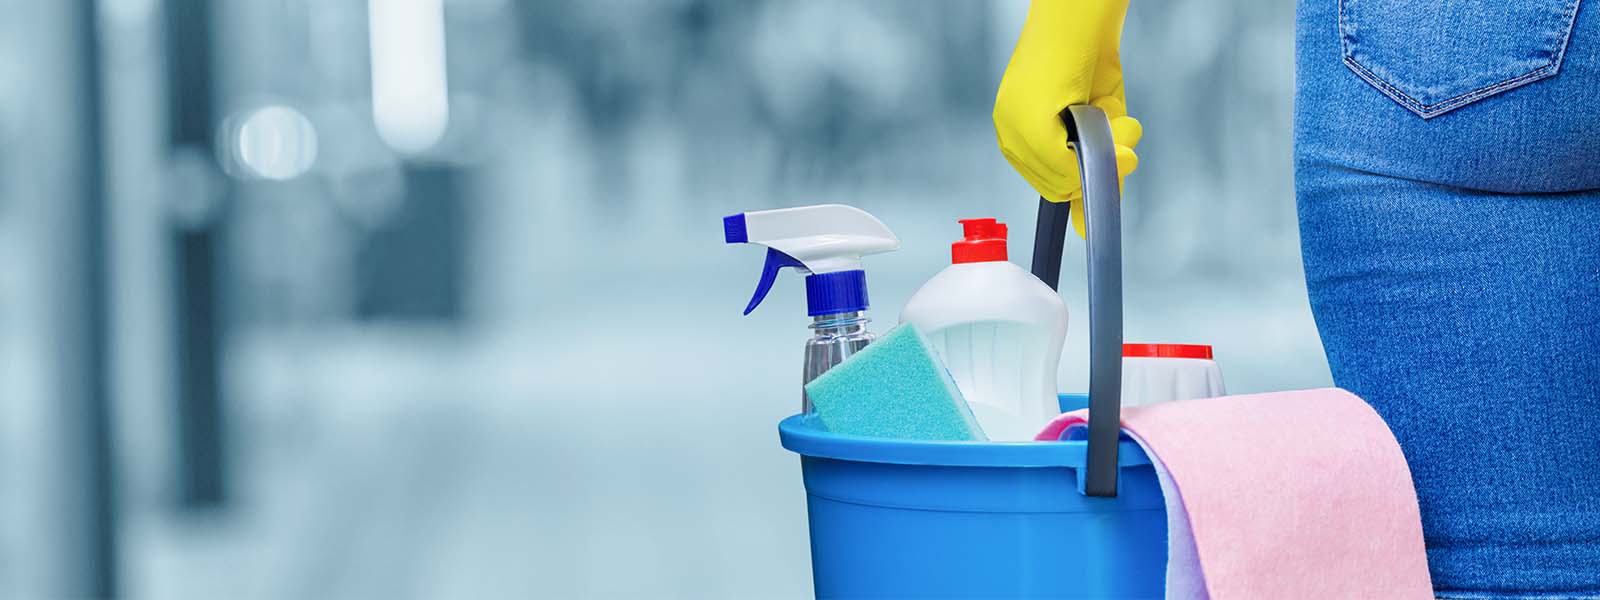 Innoway Cleaning Supplies Cleaning Brands